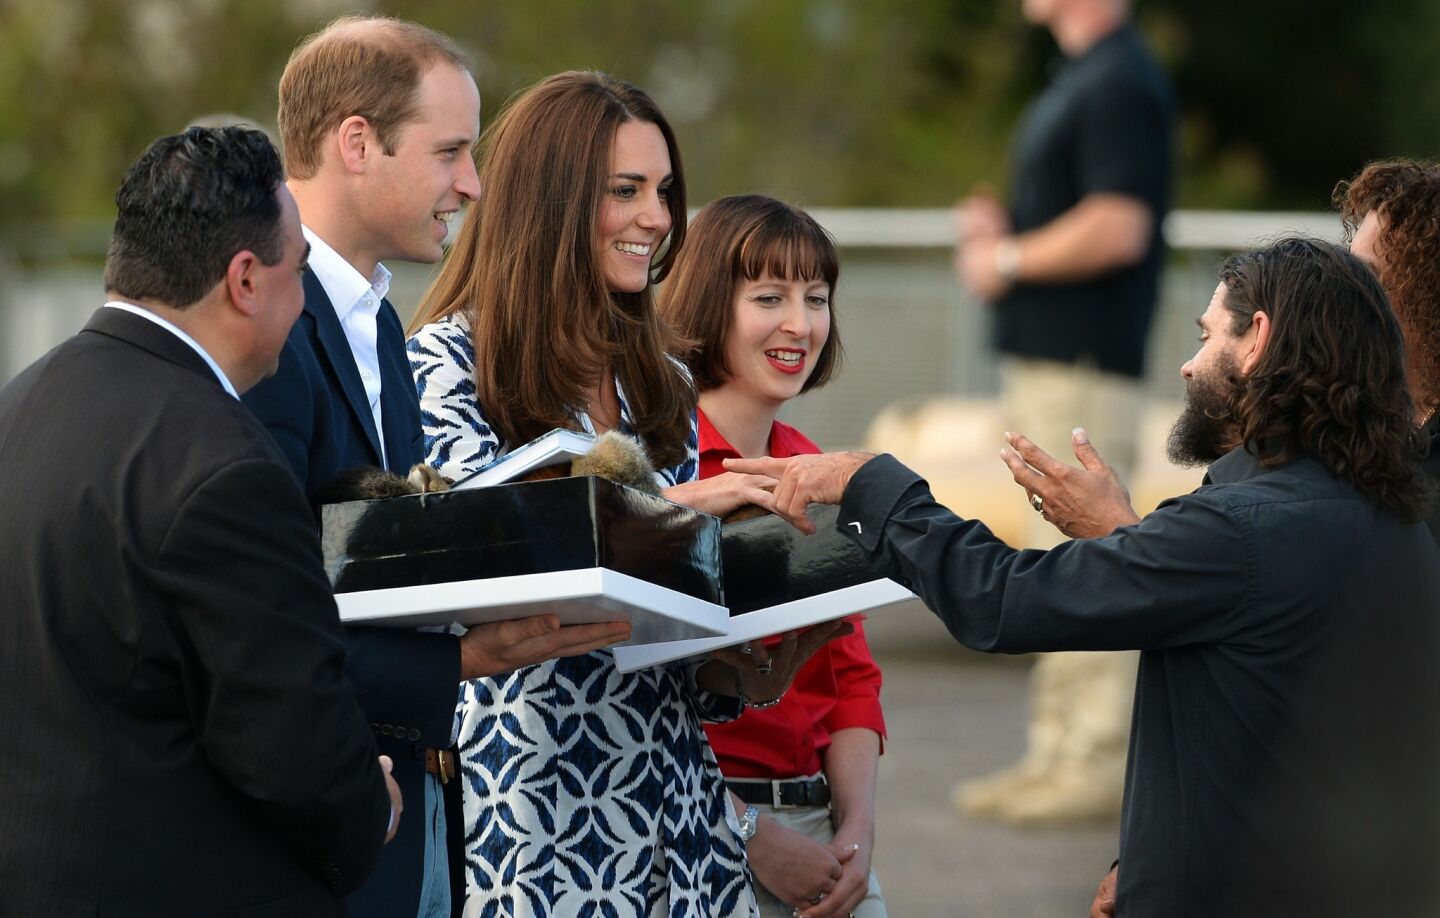 The duke and duchess are presented with gifts during a tour of the Three Sisters landmark.